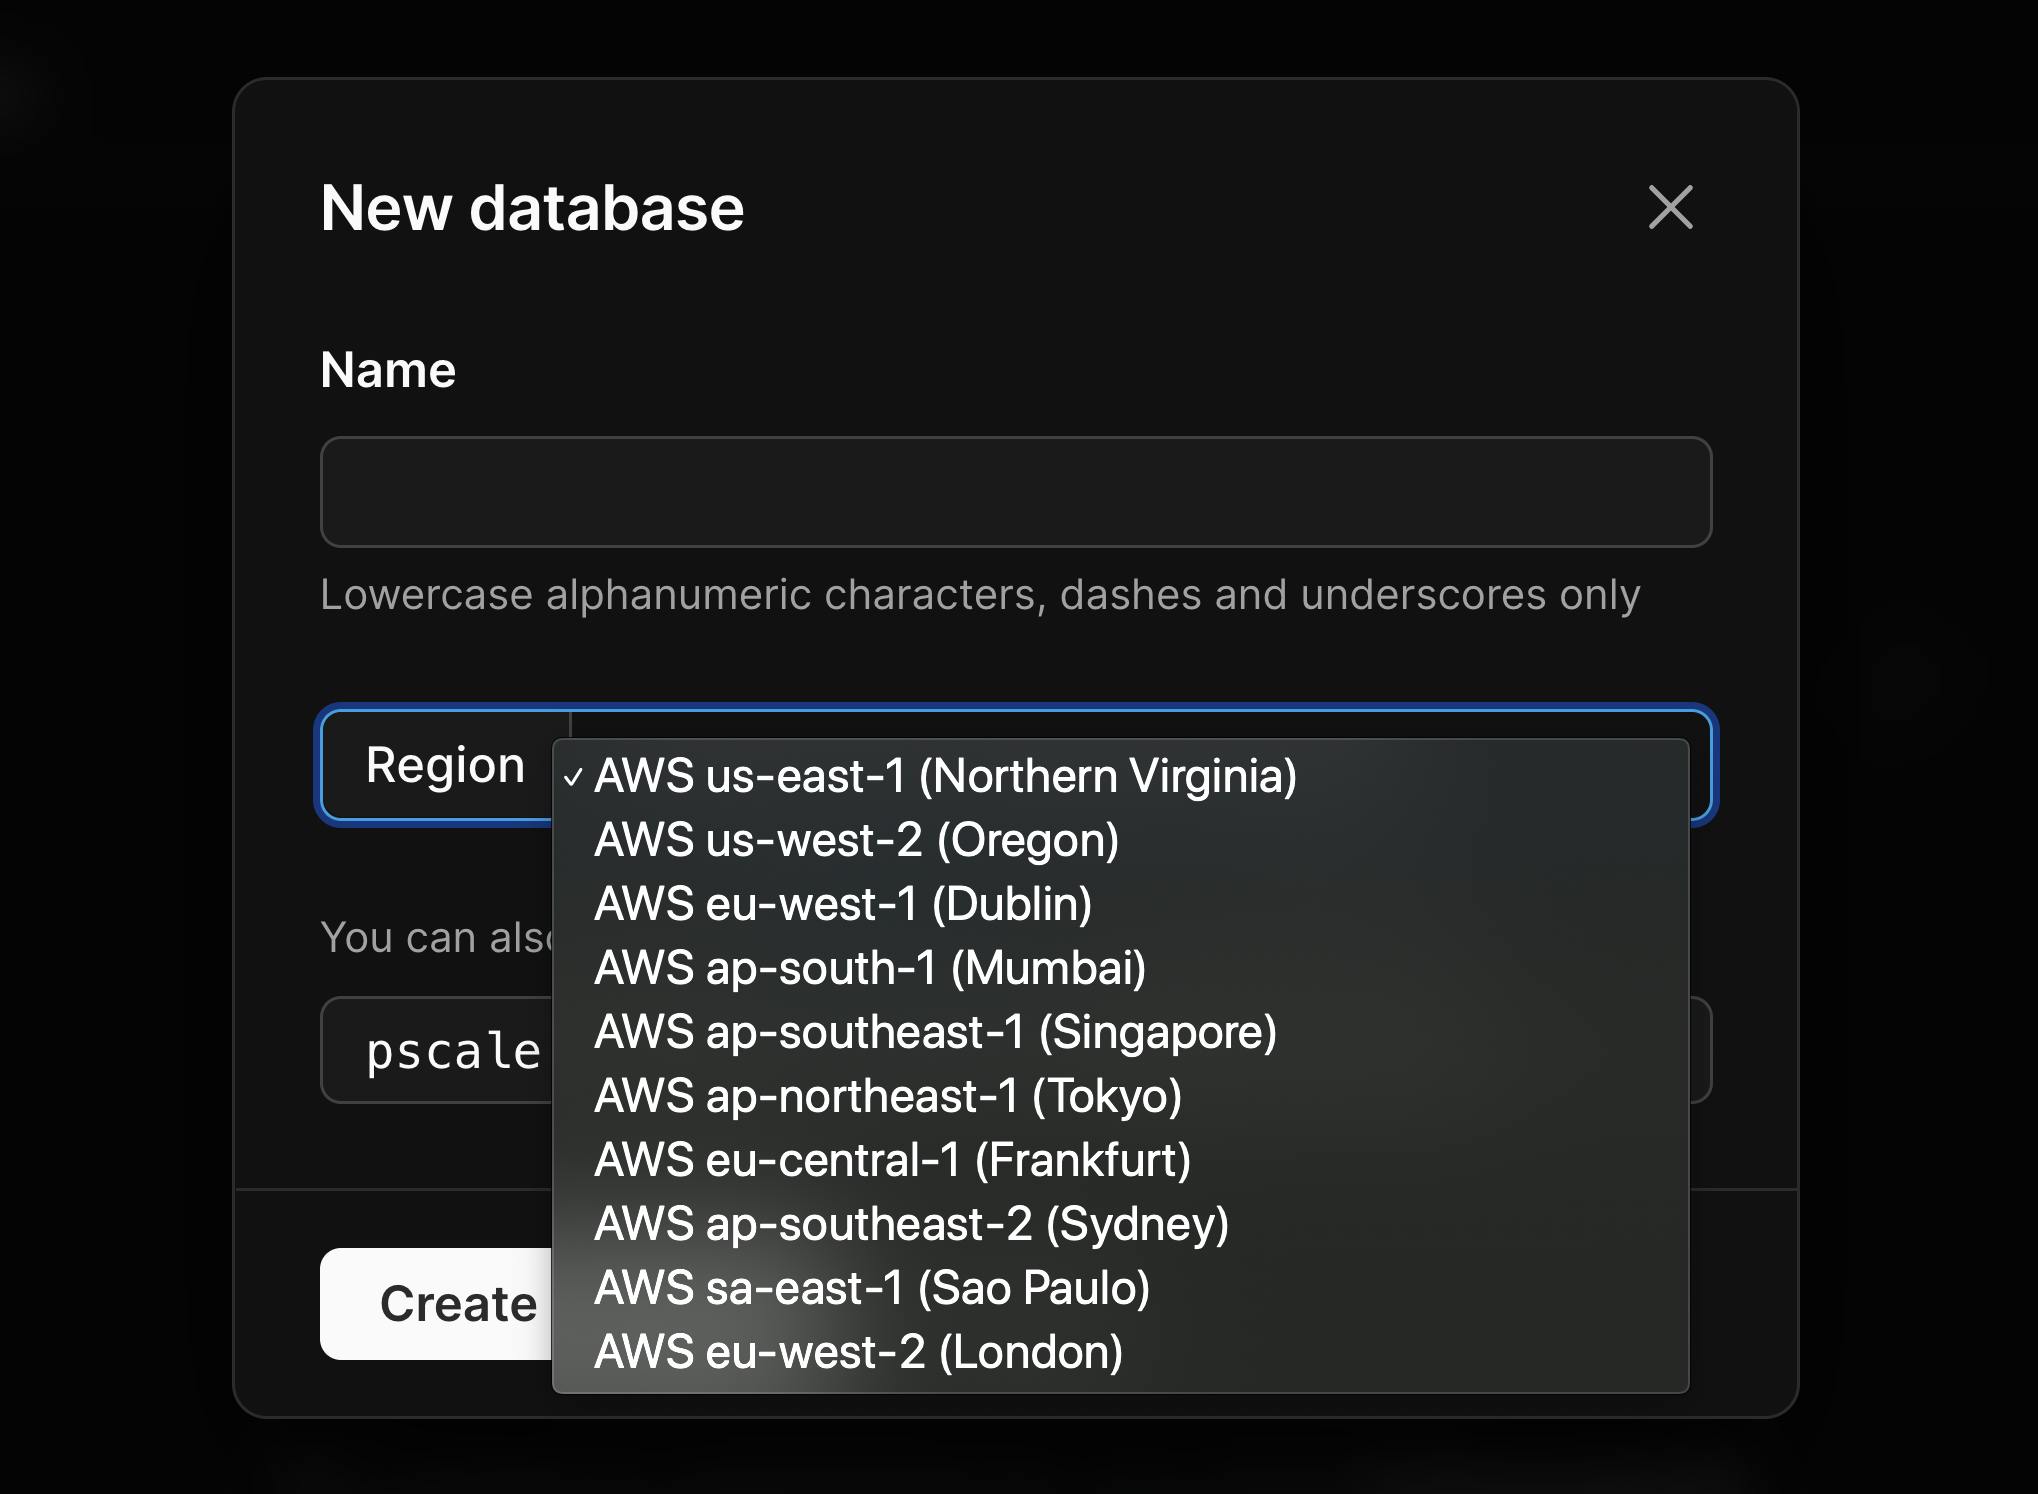 Select your database region.